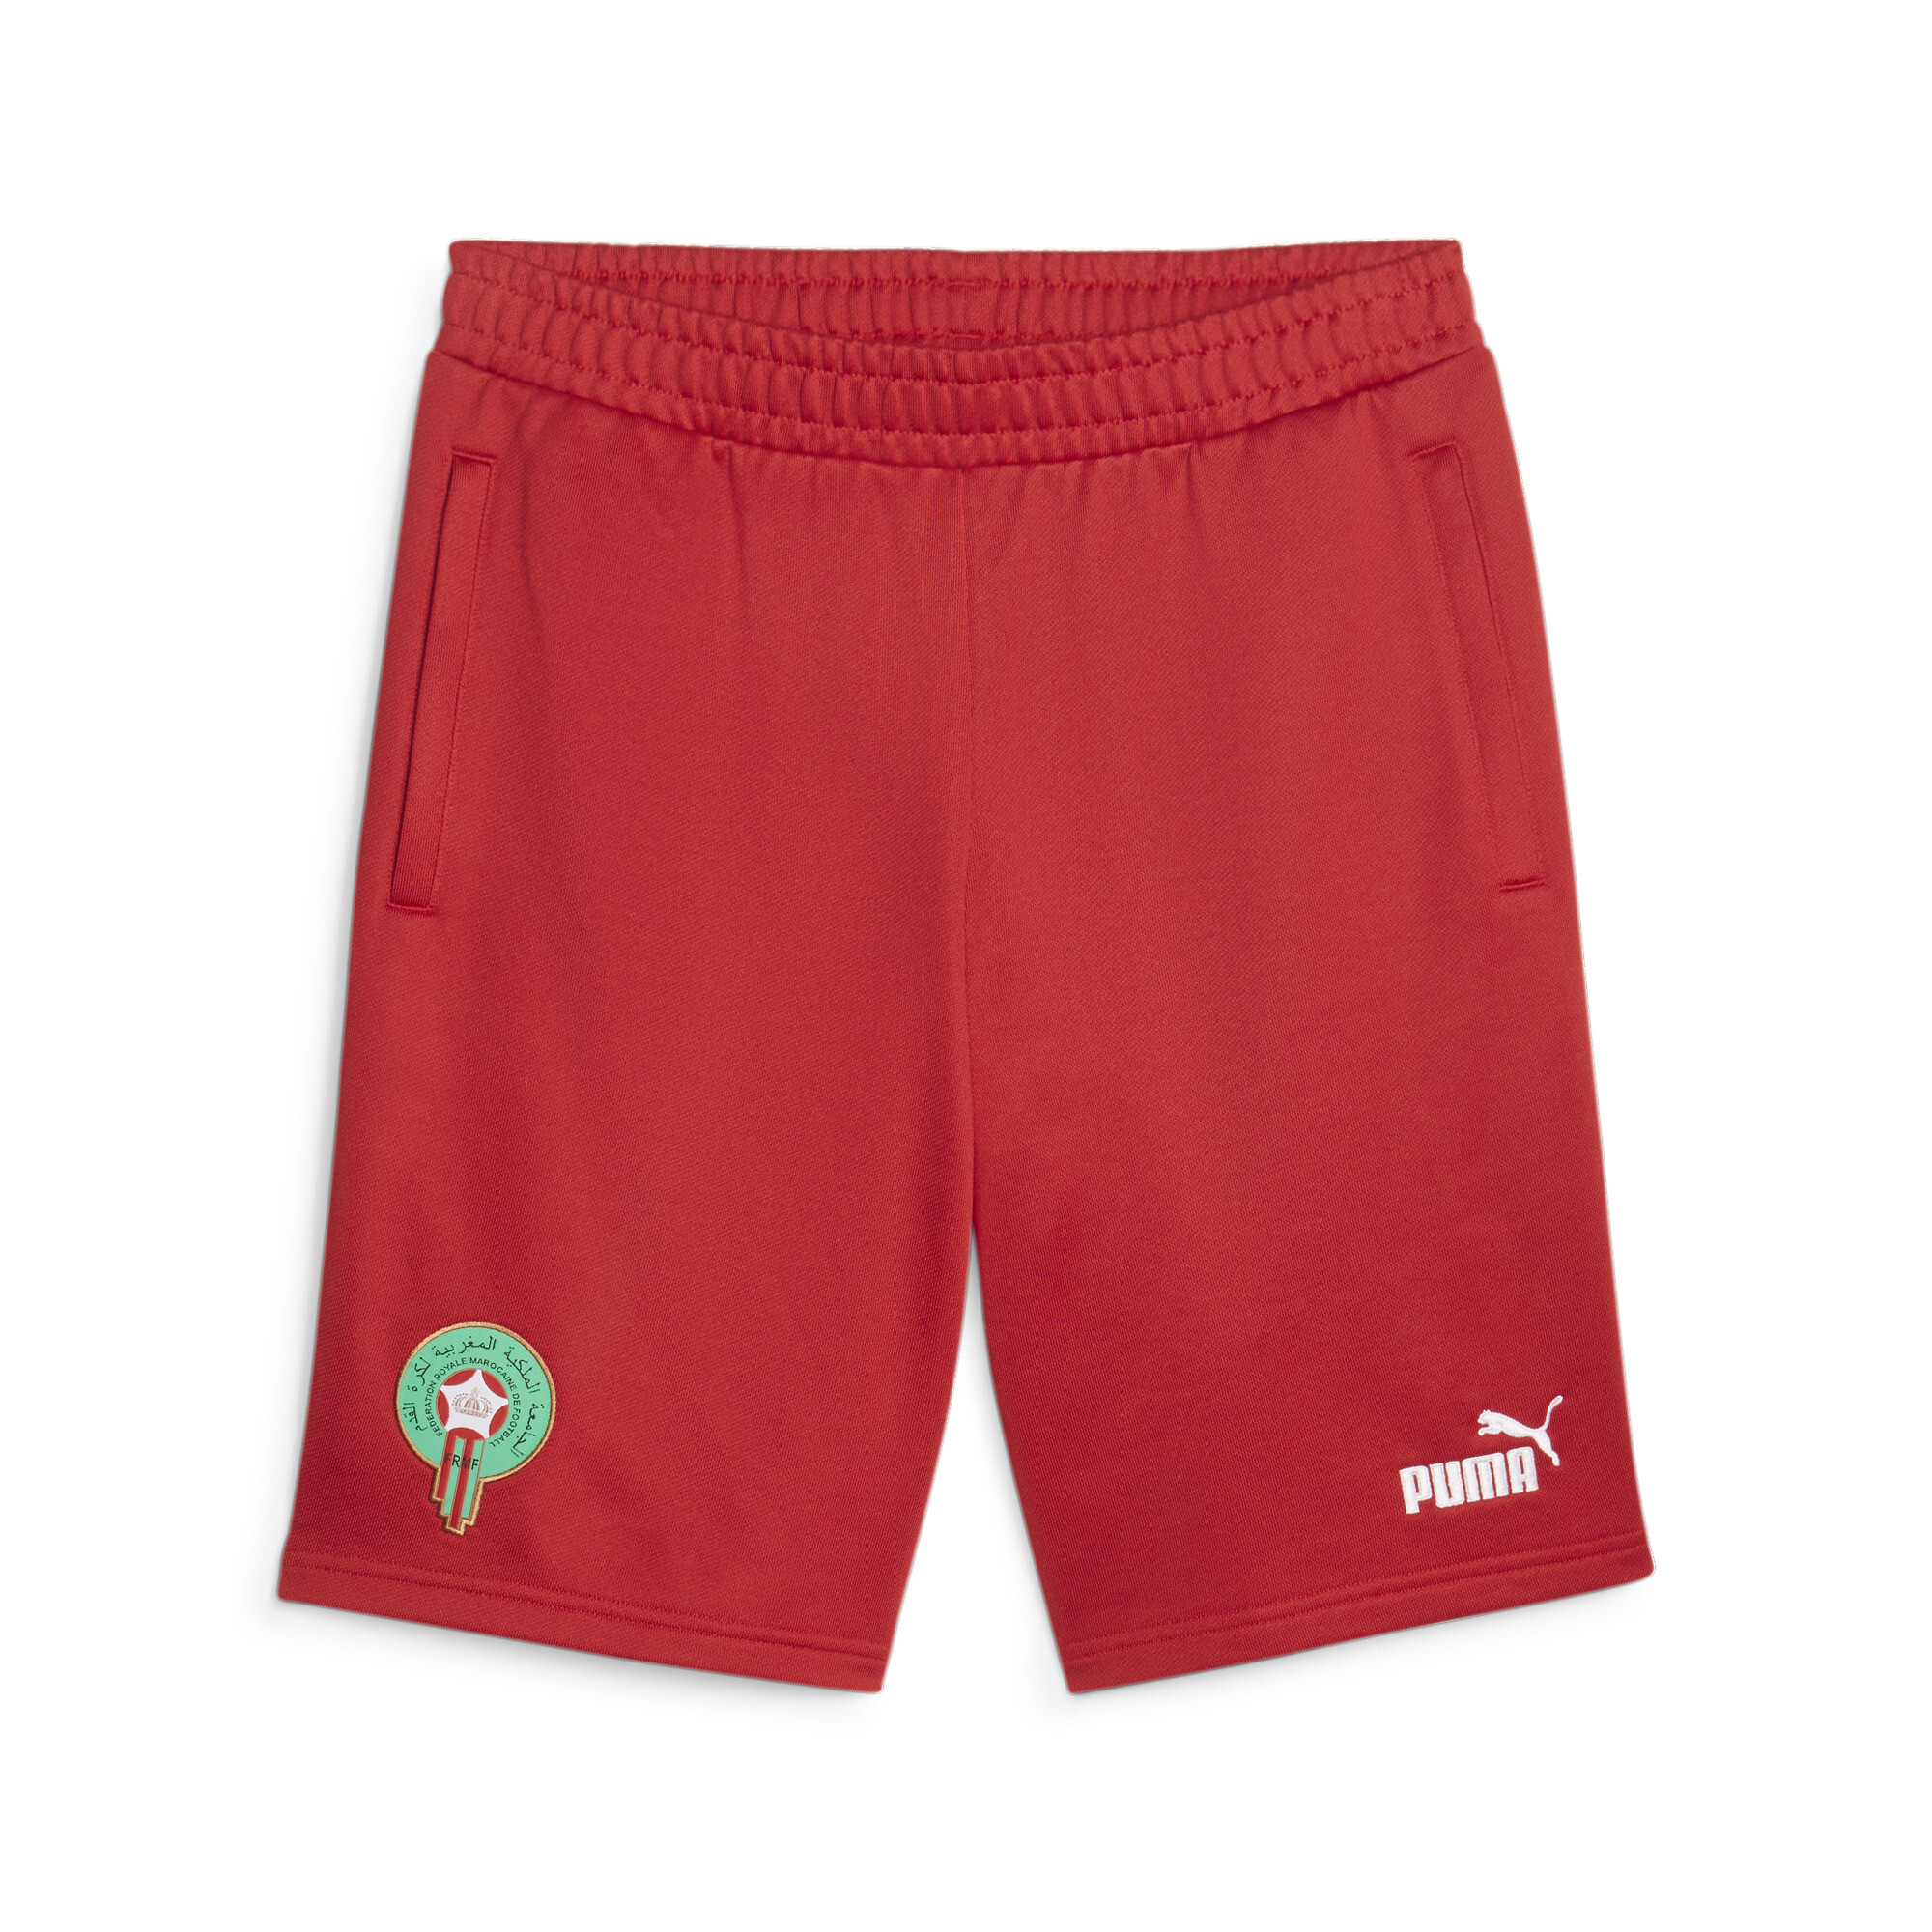 Men's Puma Morocco Ftbl Culture Shorts, Red, Size XL, Clothing